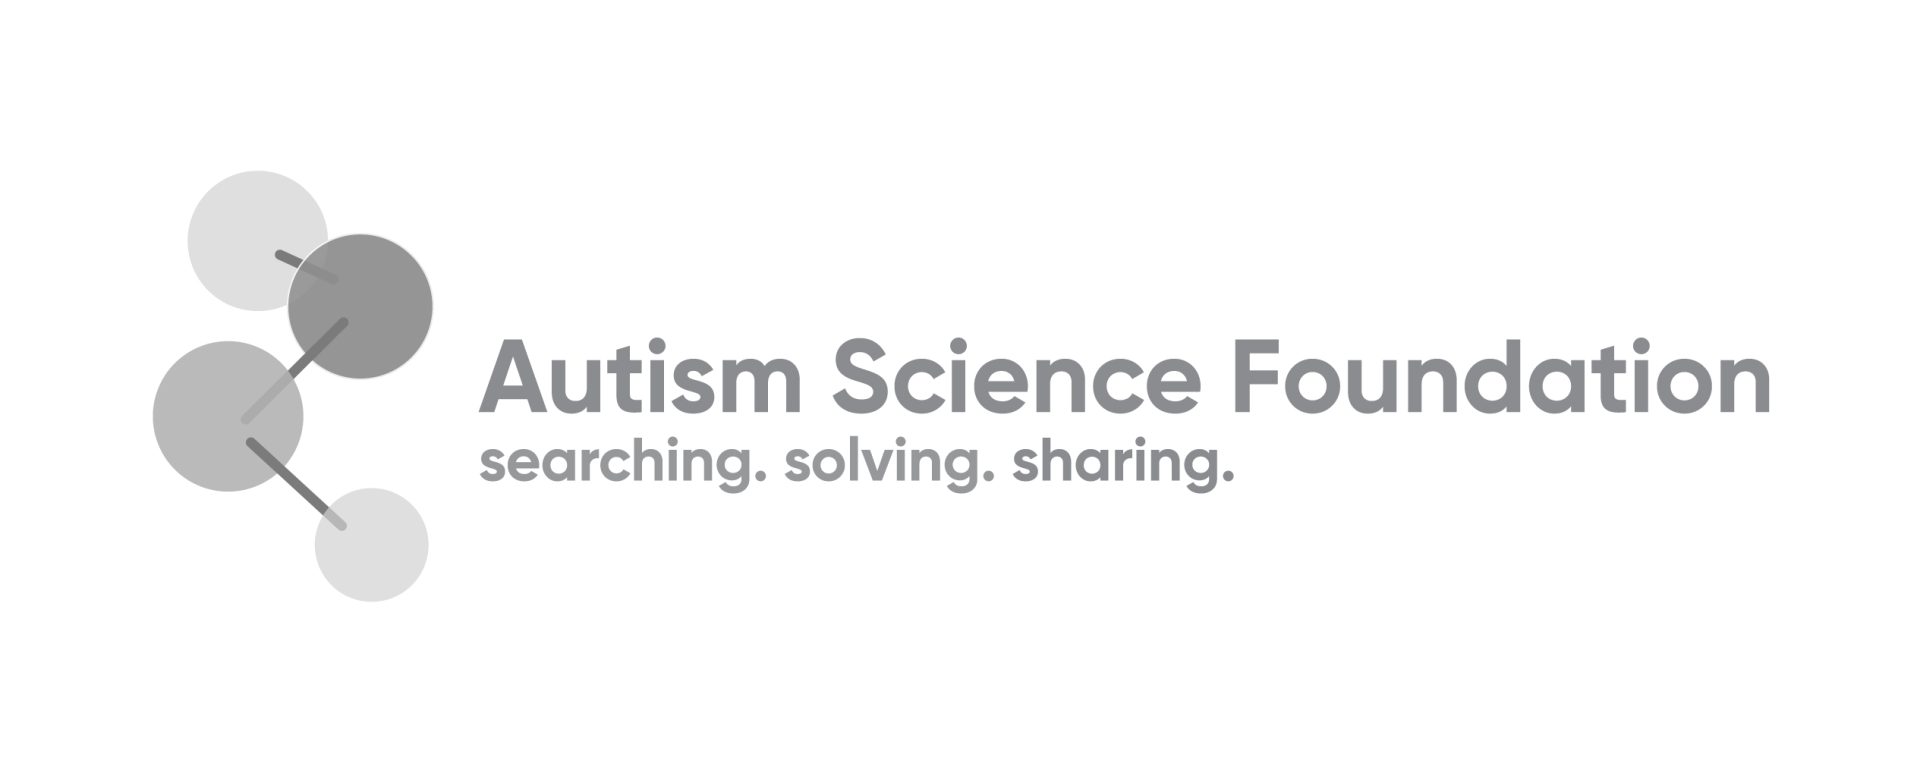 interior Autism Science Foundation Co-Founder and President Alison Singer to Receive Honorary Degree from Emory University banner image